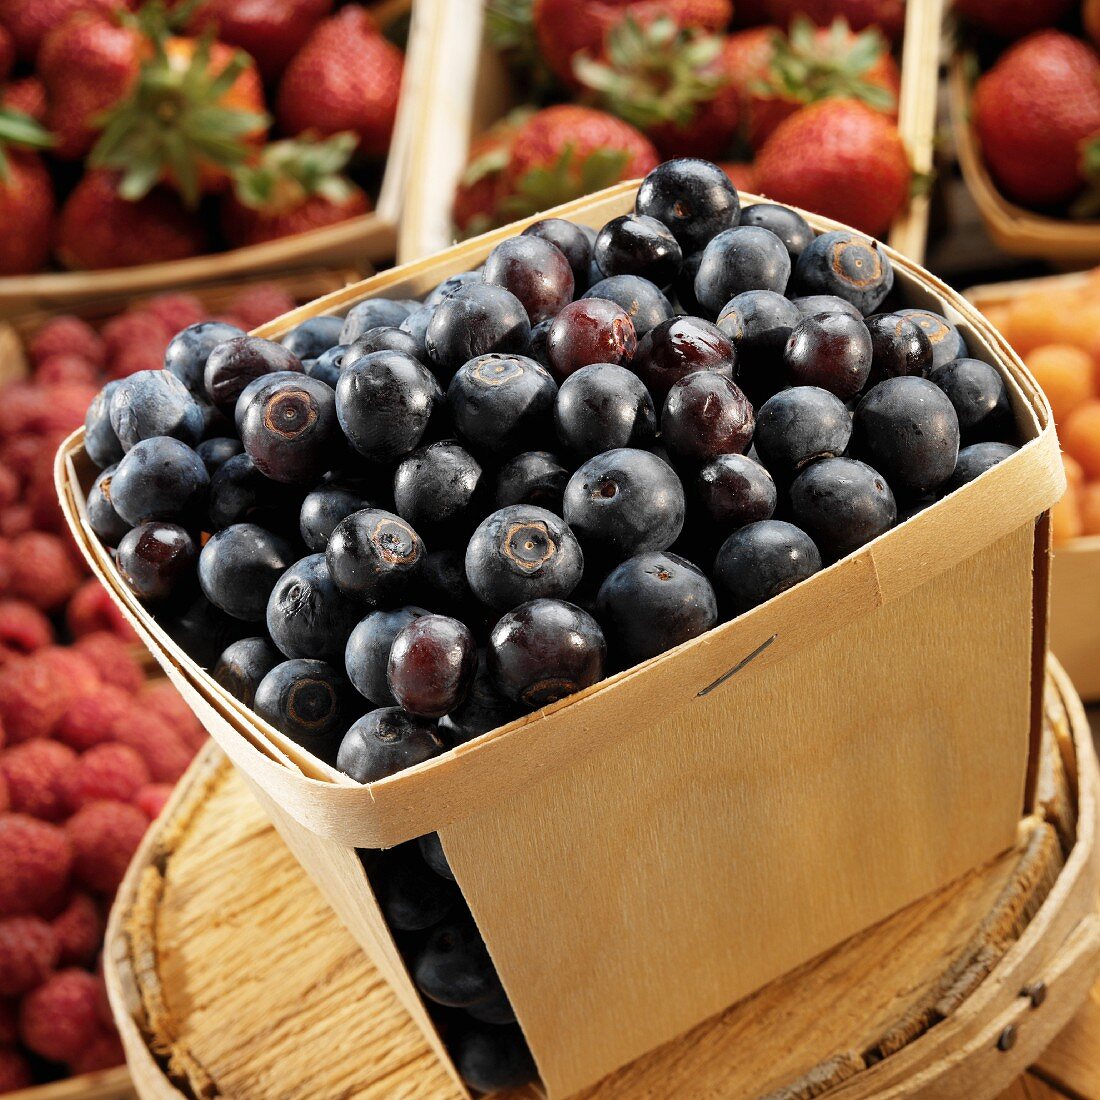 Blueberries in a wooden basket